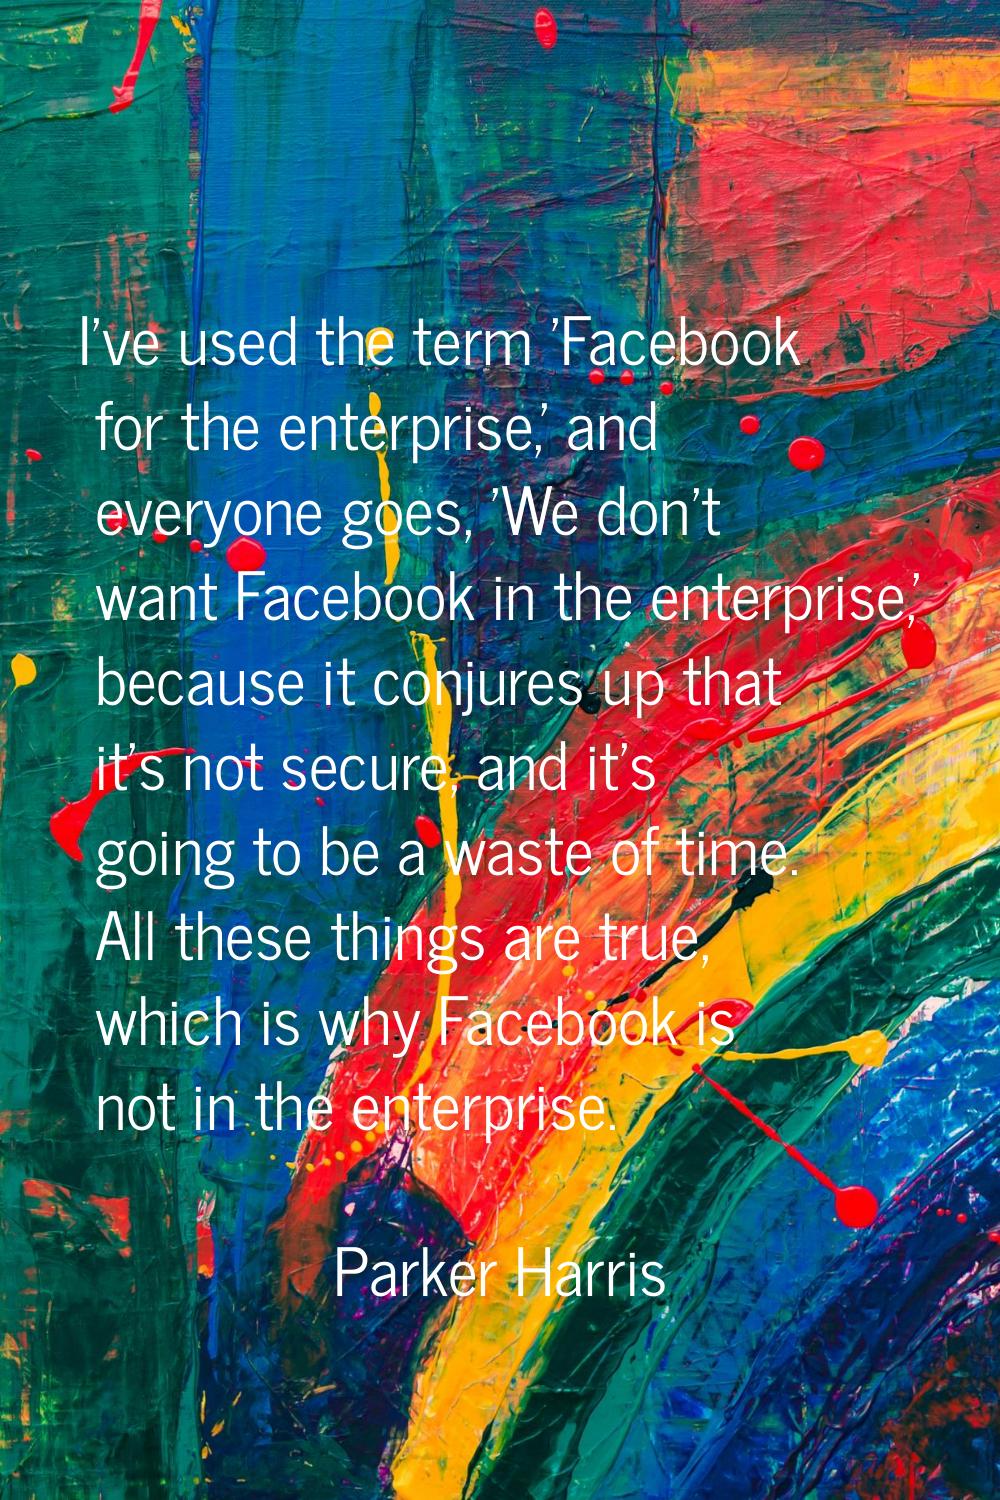 I've used the term 'Facebook for the enterprise,' and everyone goes, 'We don't want Facebook in the